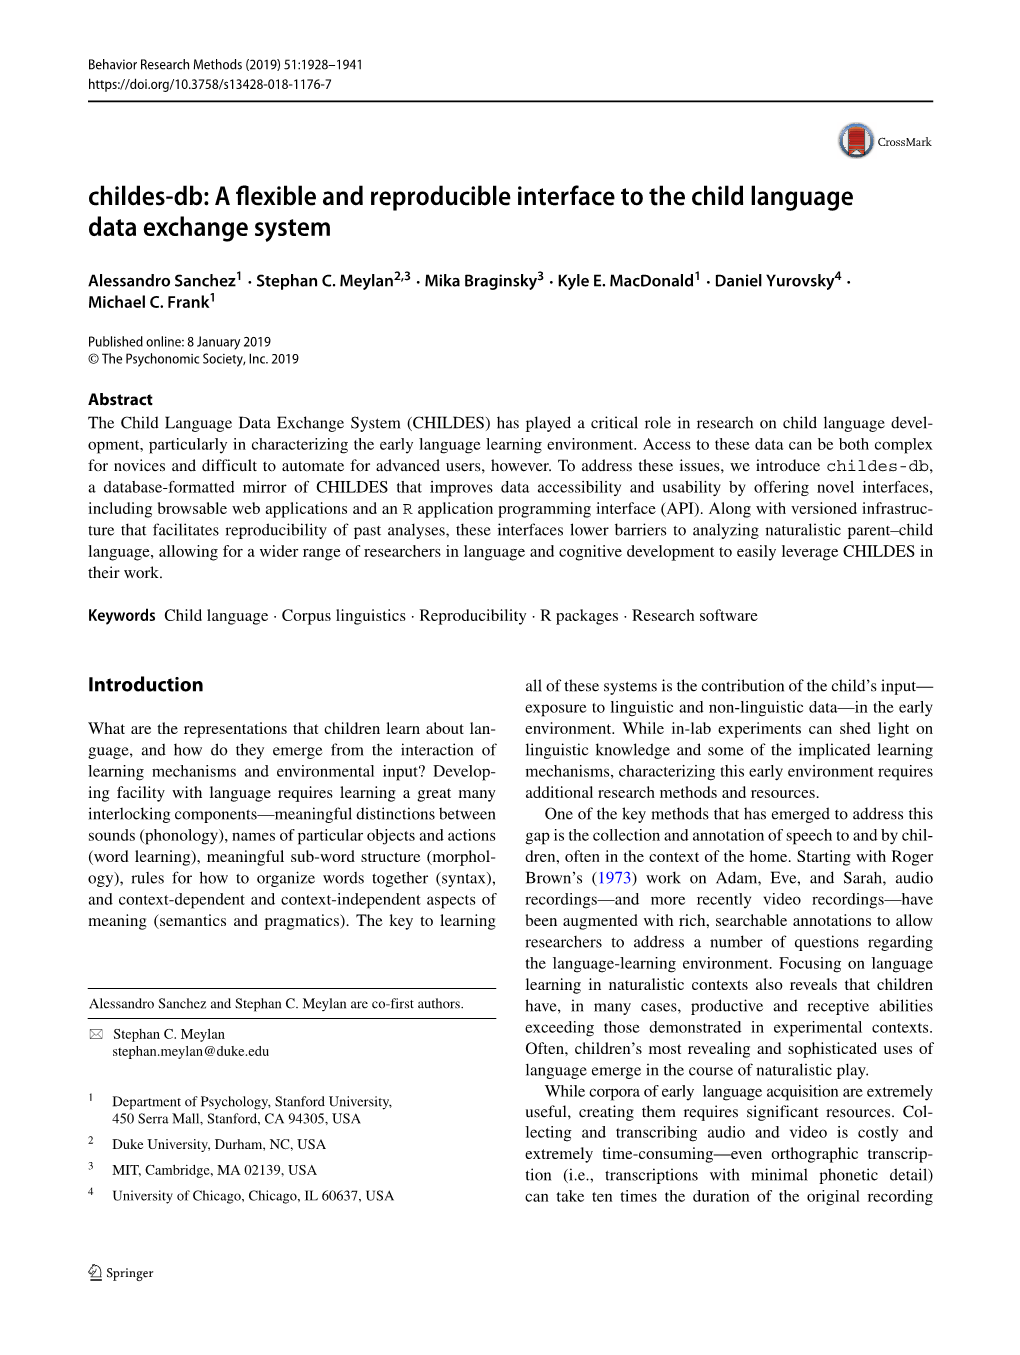 Childes-Db: a ﬂexible and Reproducible Interface to the Child Language Data Exchange System